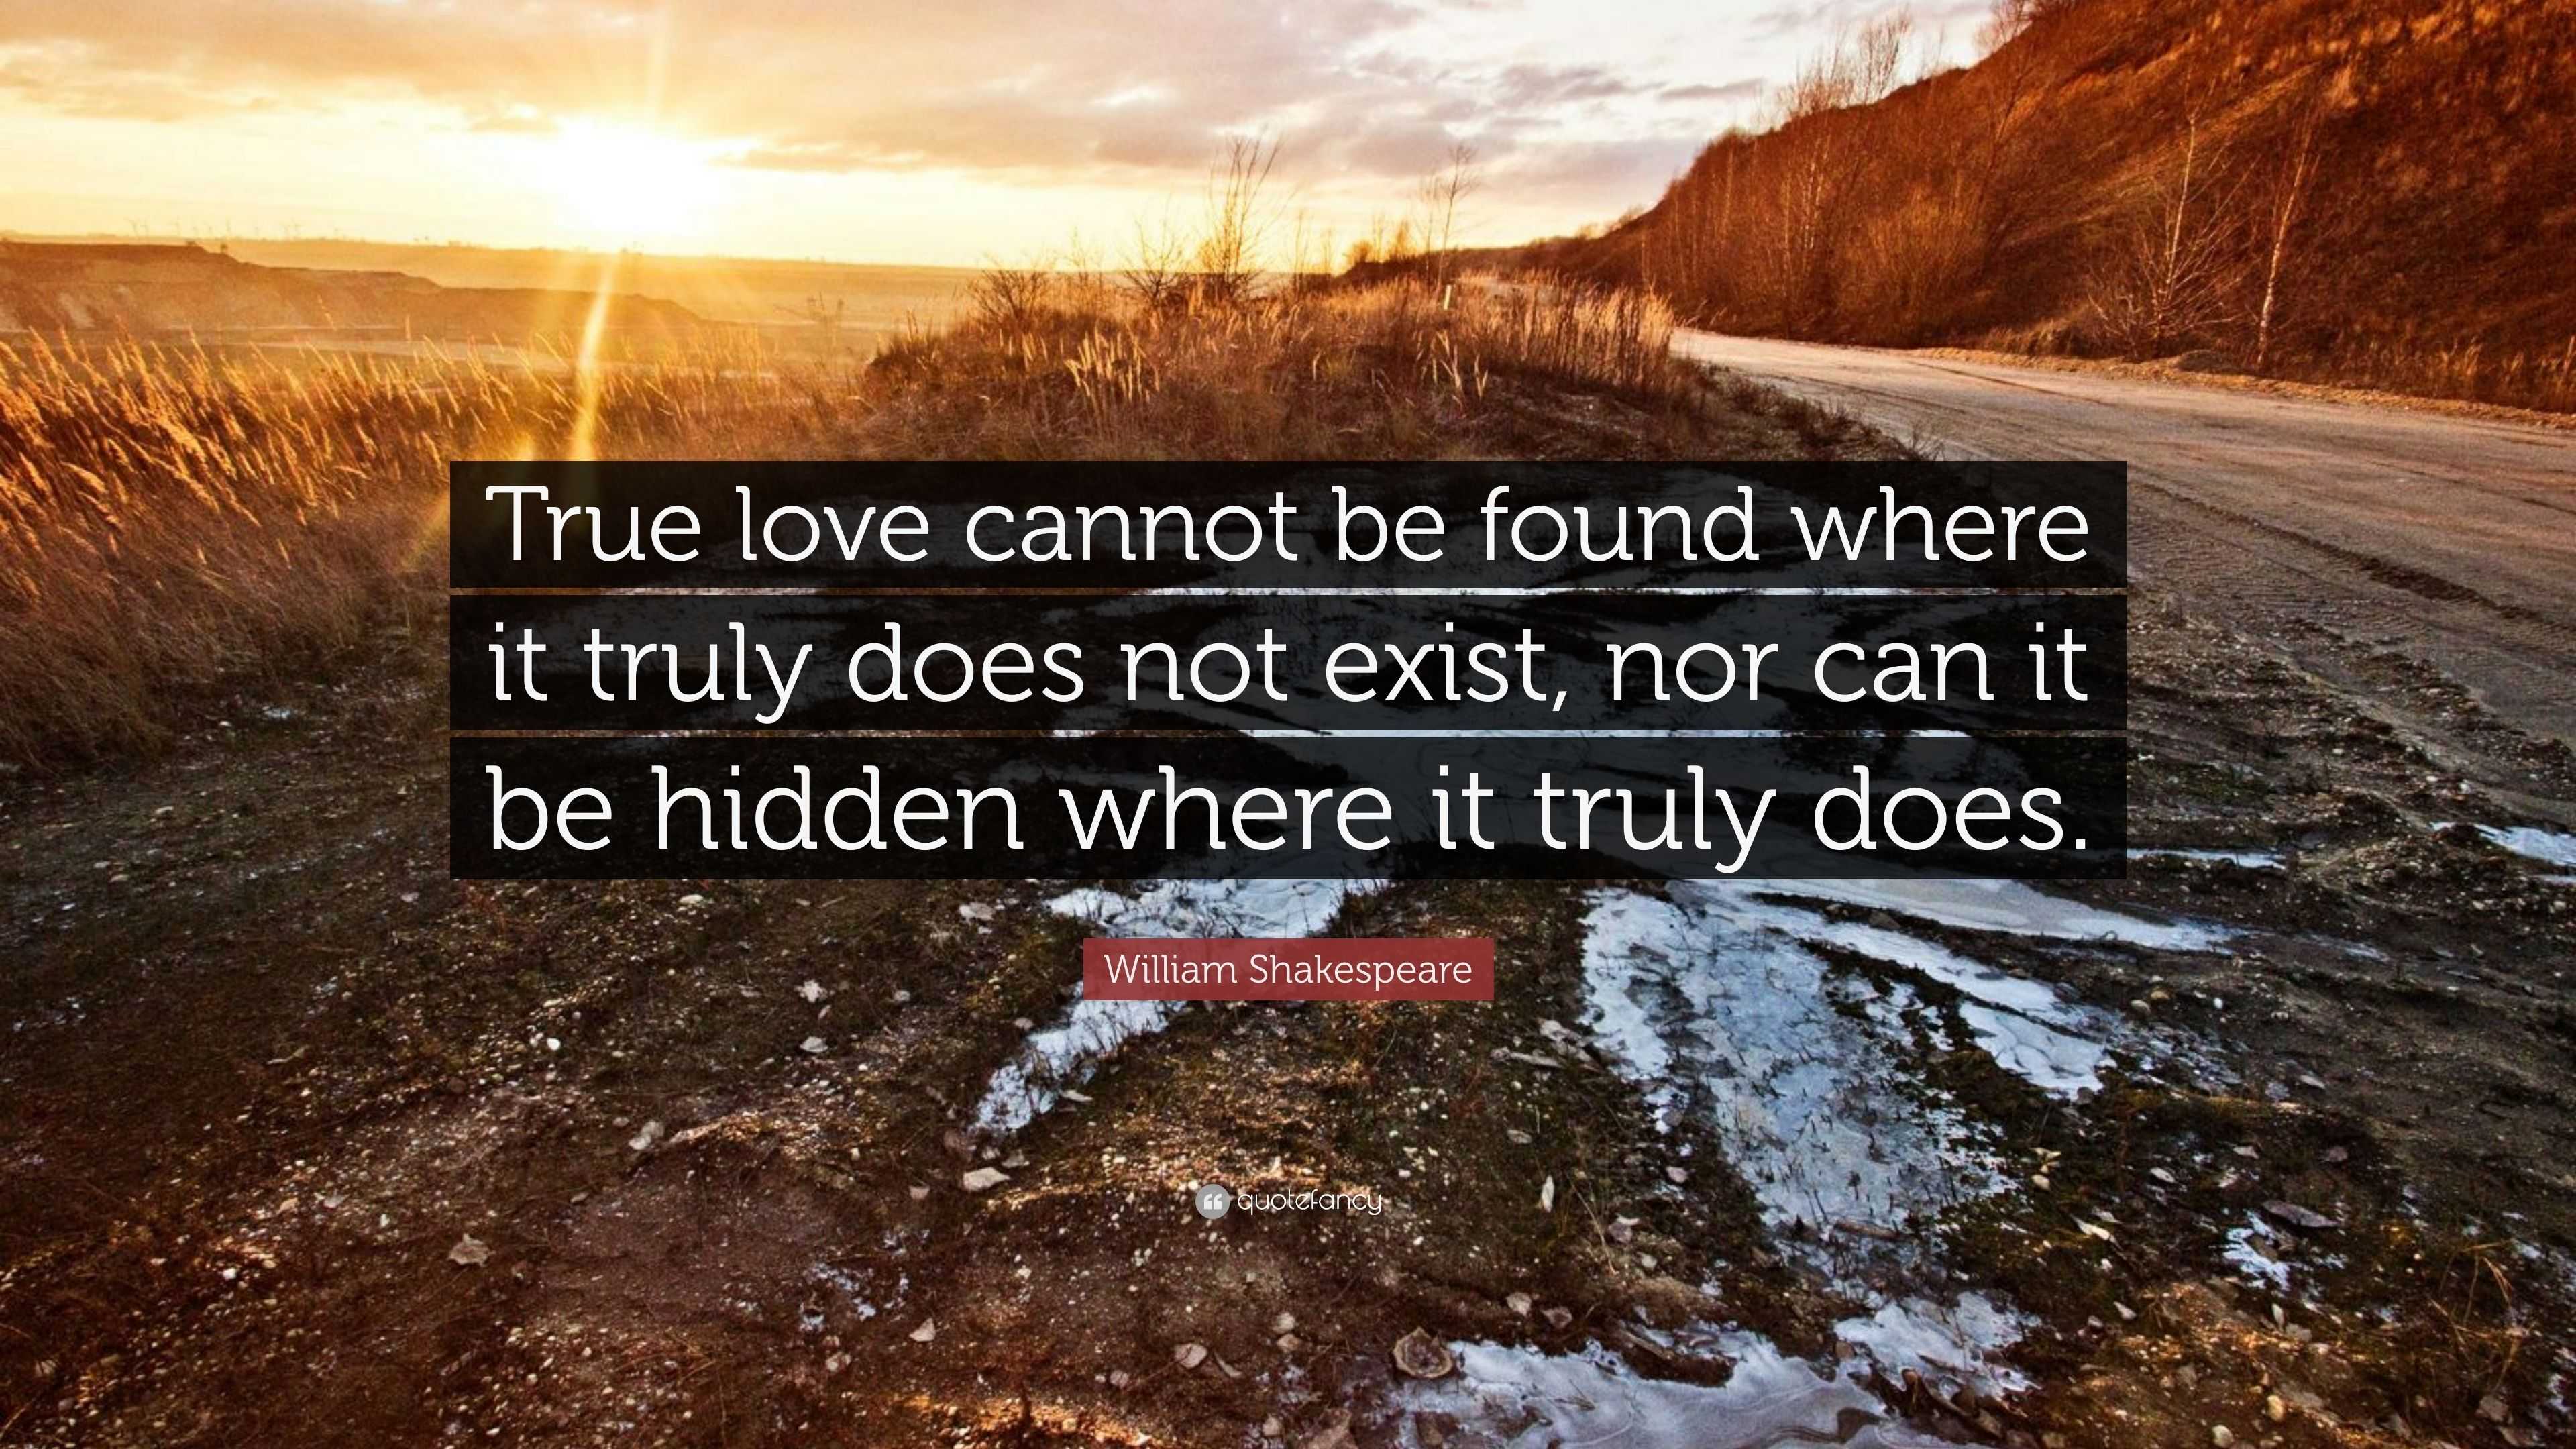 William Shakespeare Quote “True love cannot be found where it truly does not exist